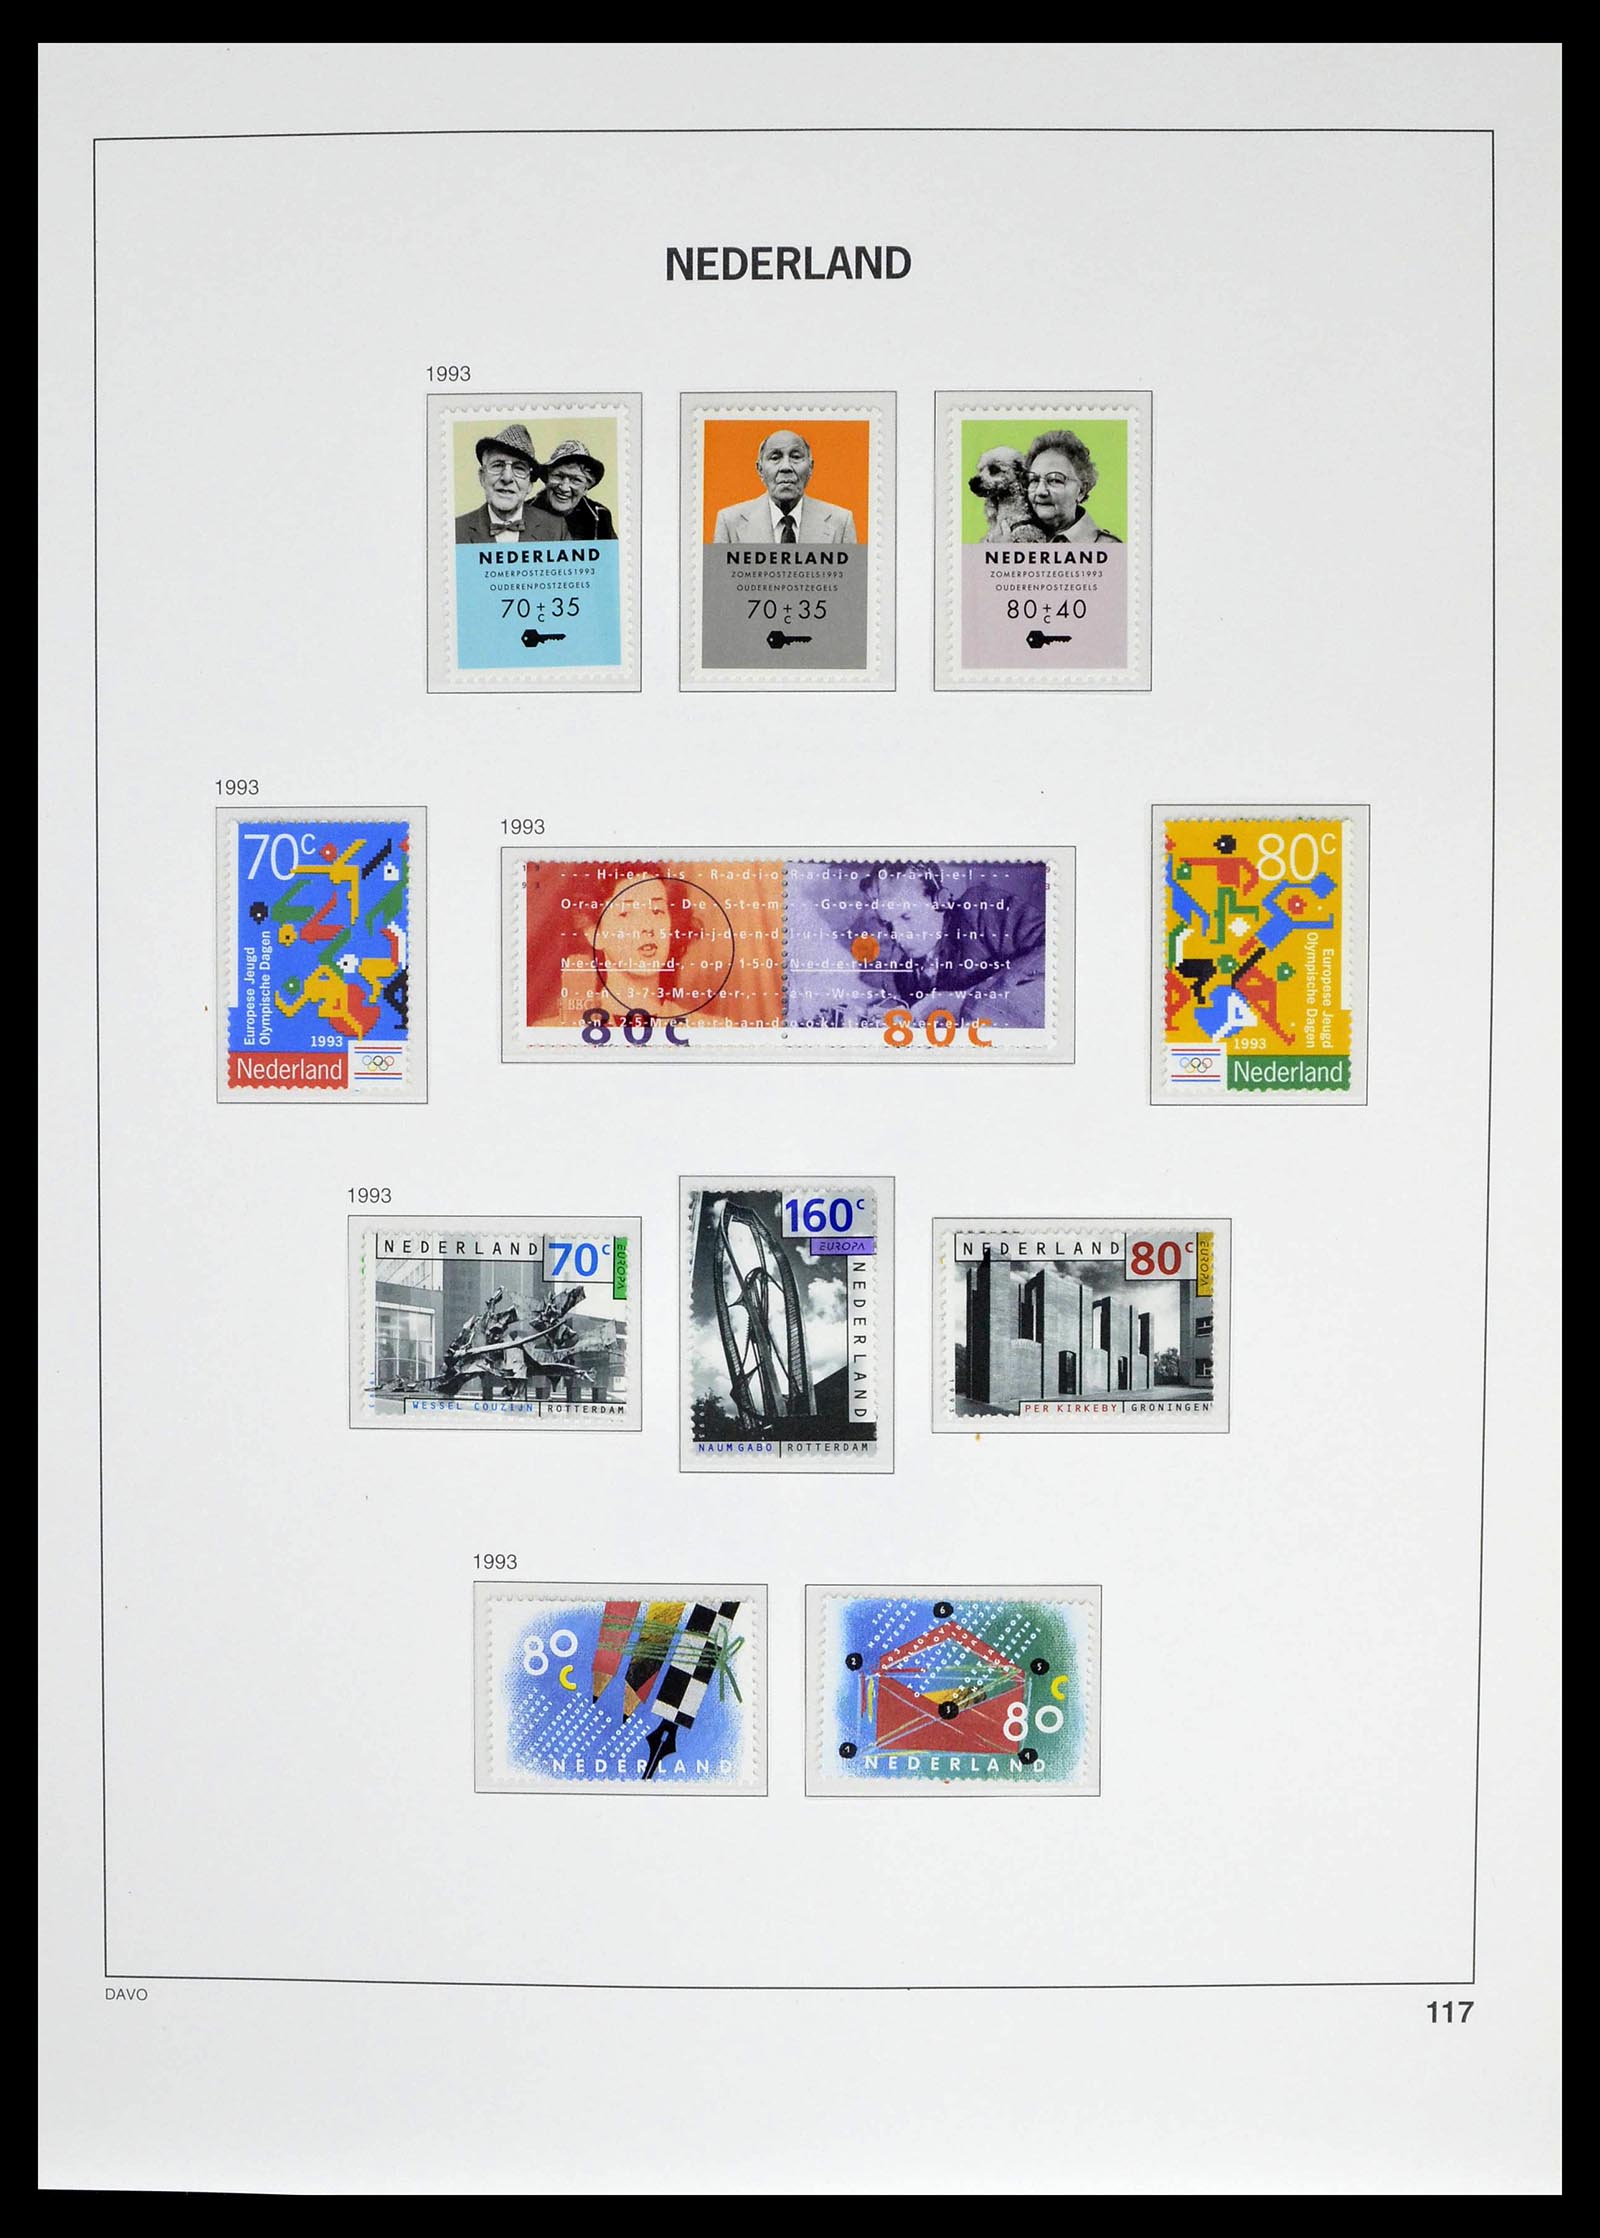 39136 0068 - Stamp collection 39136 Netherlands 1975-2020!